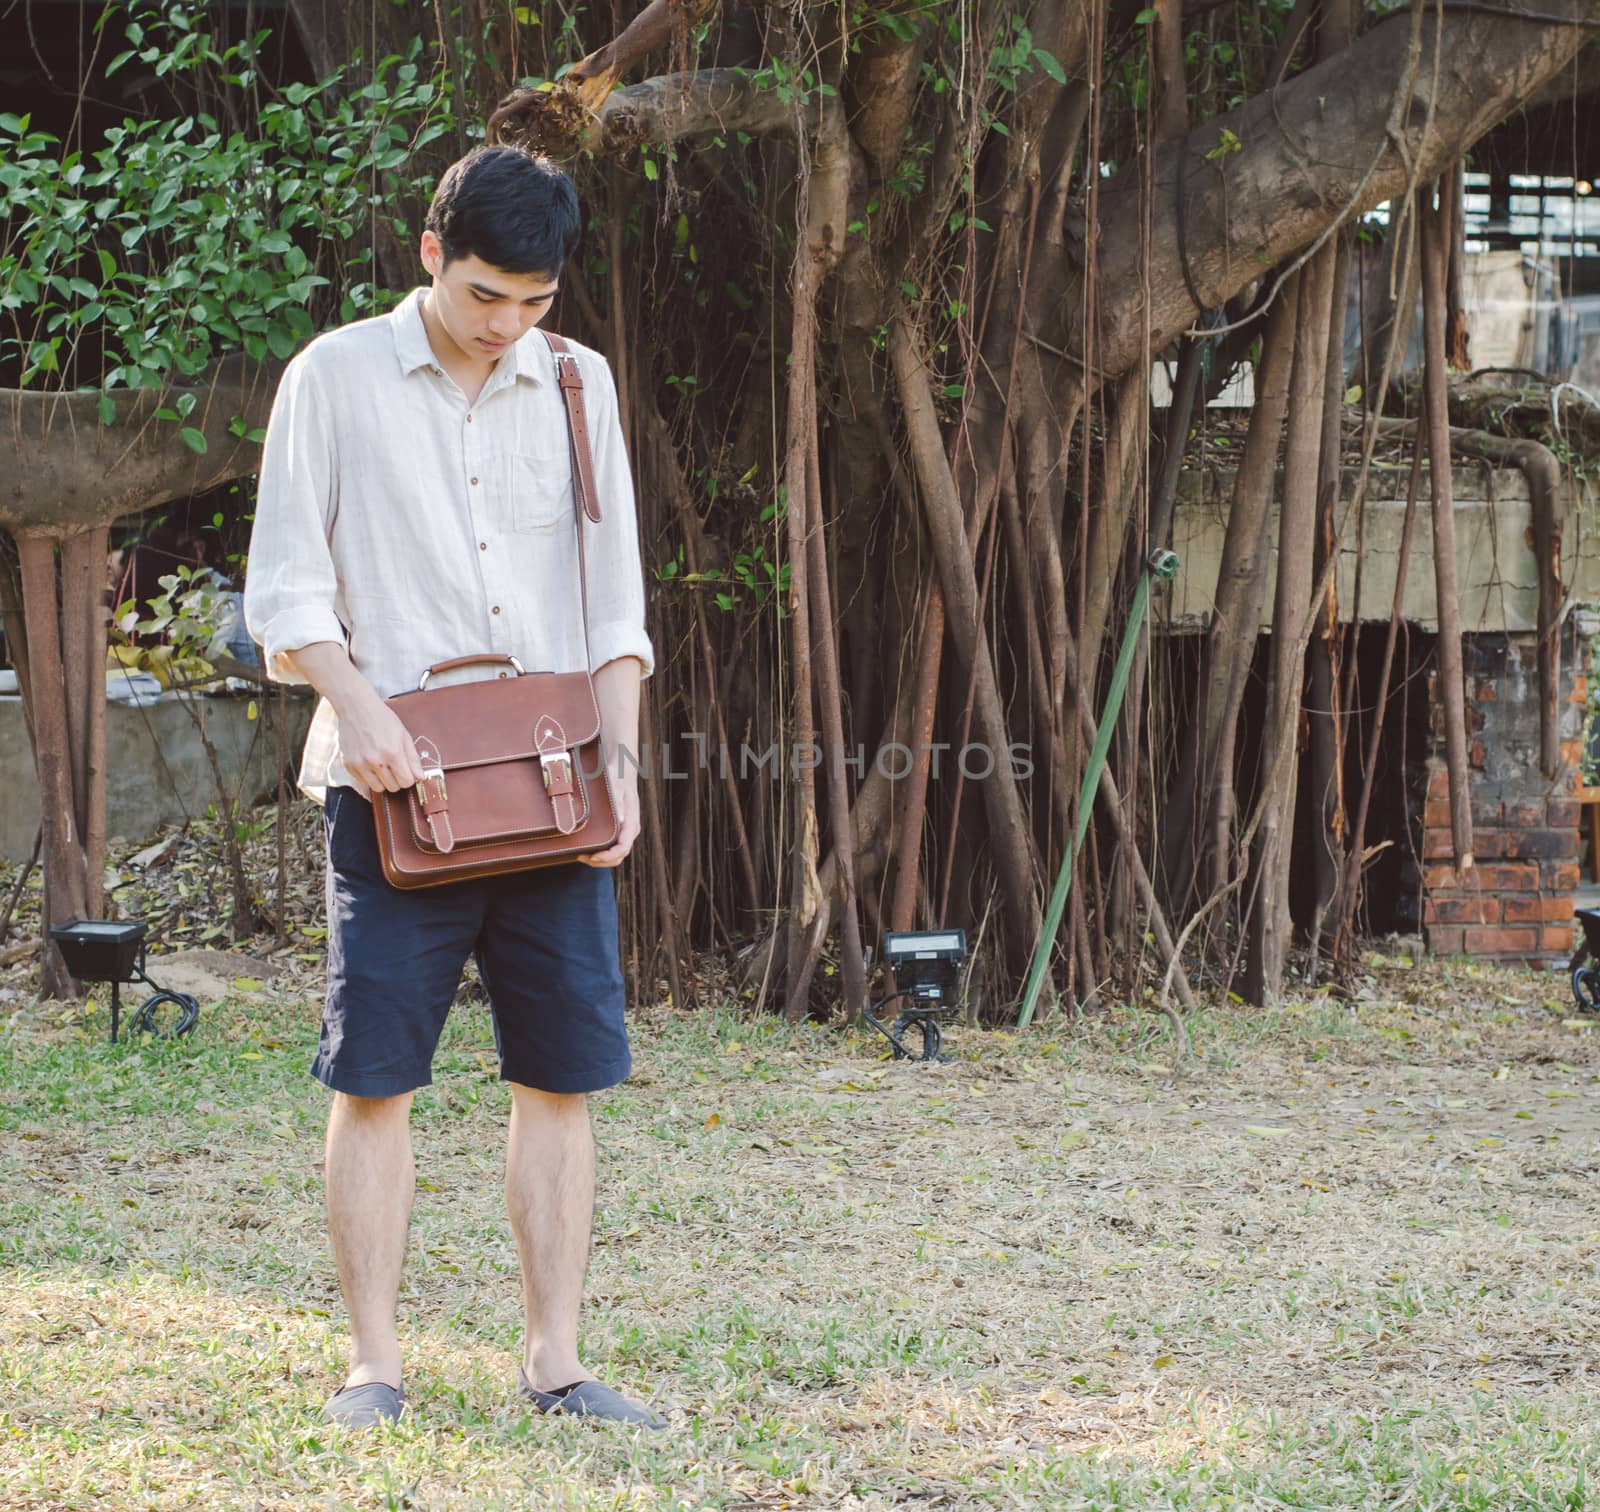 Fashionable young man with leather bag by siraanamwong